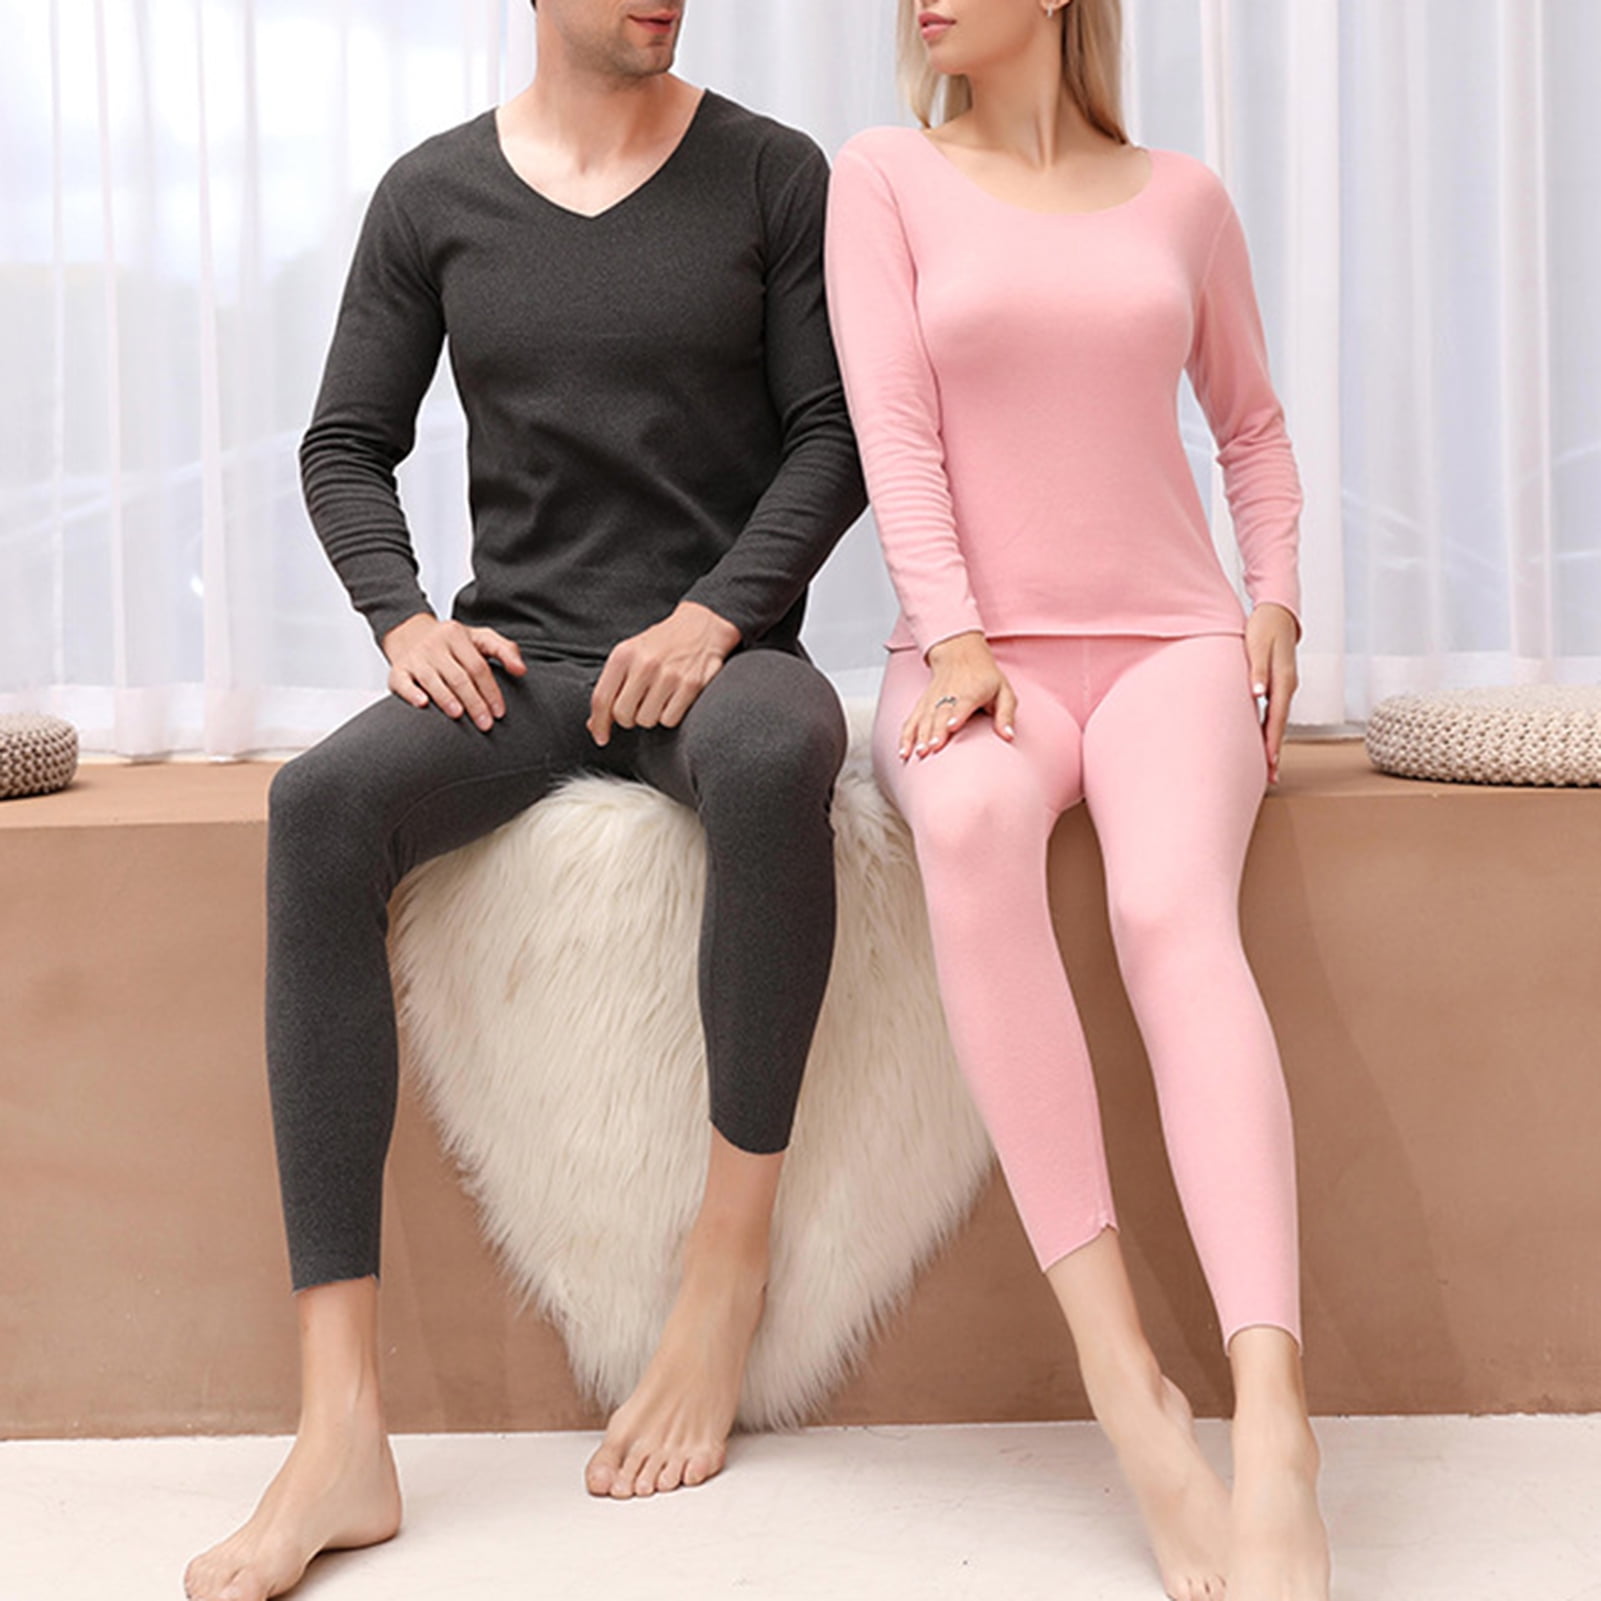 Men's Thermal Solid Colors Underwear Set Skiing Winter Warm Base Layers  Tight Long Johns Top & Bottom Set with Fleece Lined for Cold Weather 